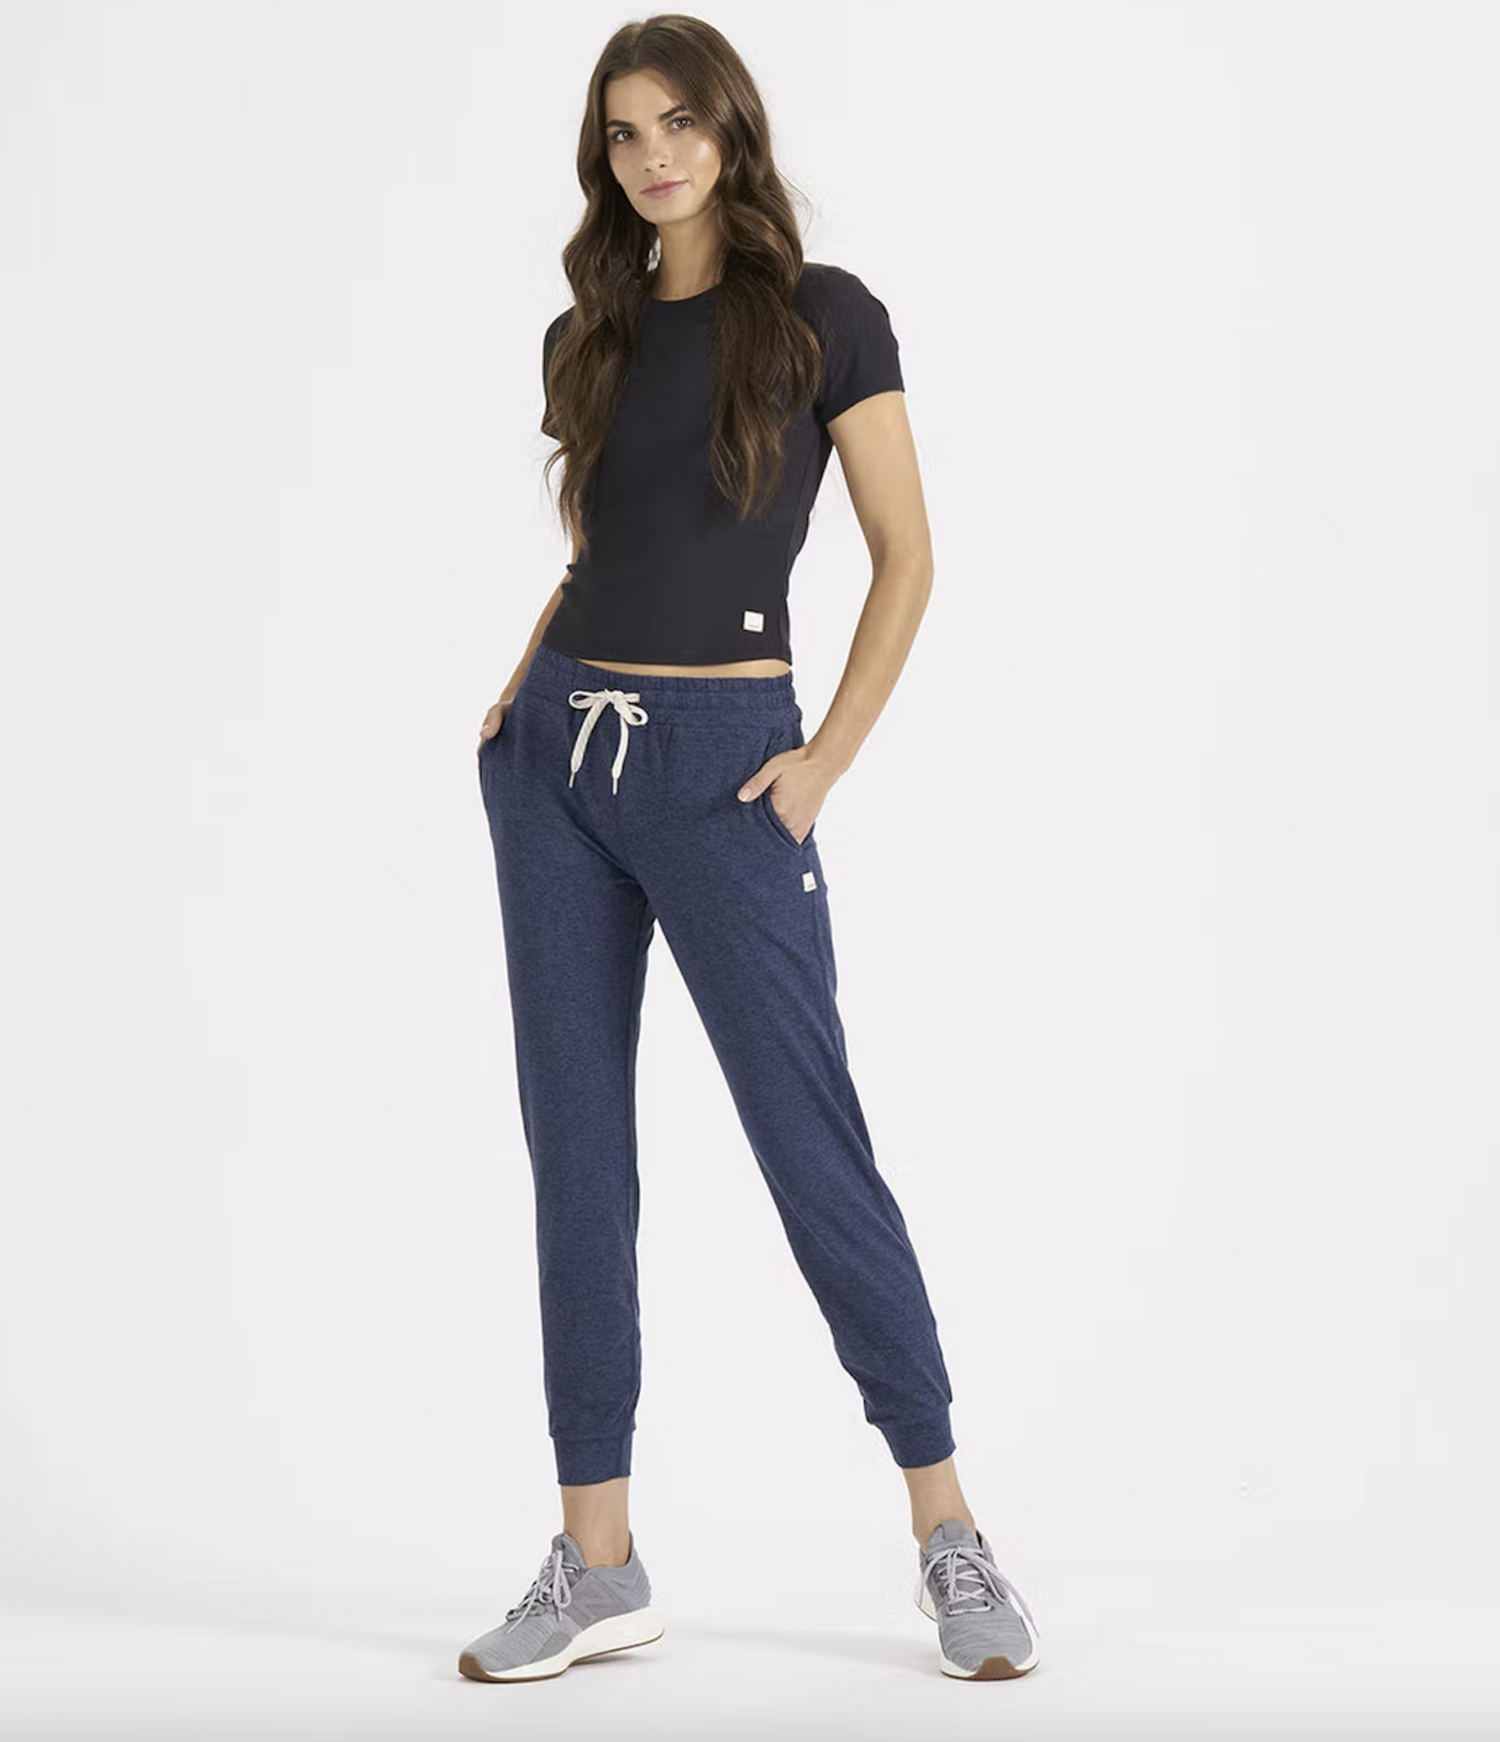 W Performance Jogger Long - Navy Heather - Twisted Tree